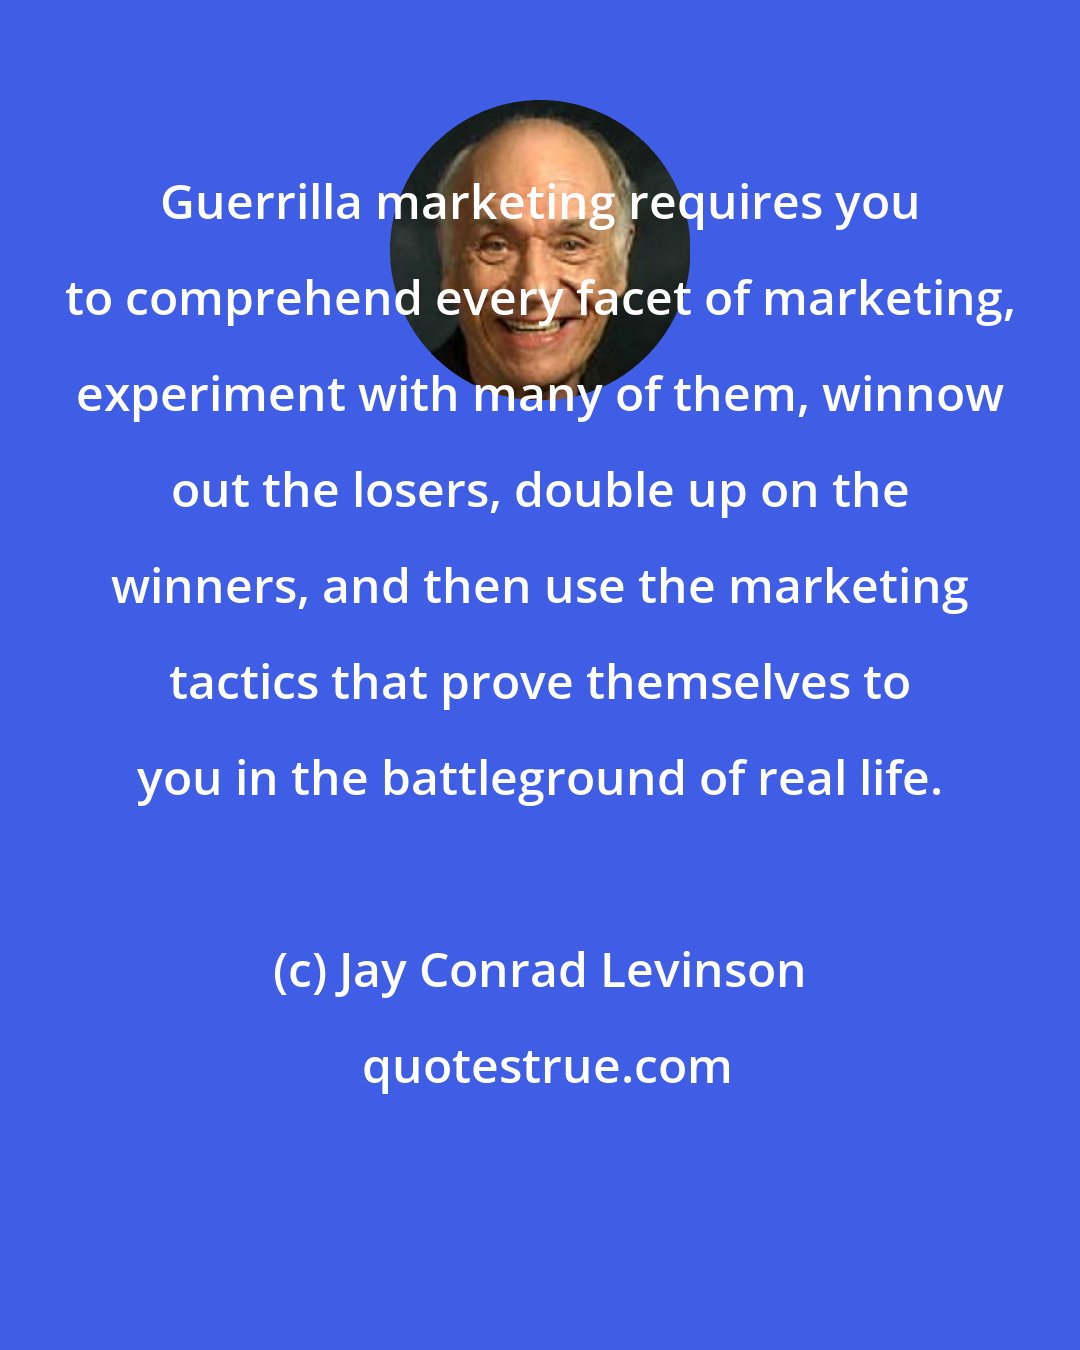 Jay Conrad Levinson: Guerrilla marketing requires you to comprehend every facet of marketing, experiment with many of them, winnow out the losers, double up on the winners, and then use the marketing tactics that prove themselves to you in the battleground of real life.